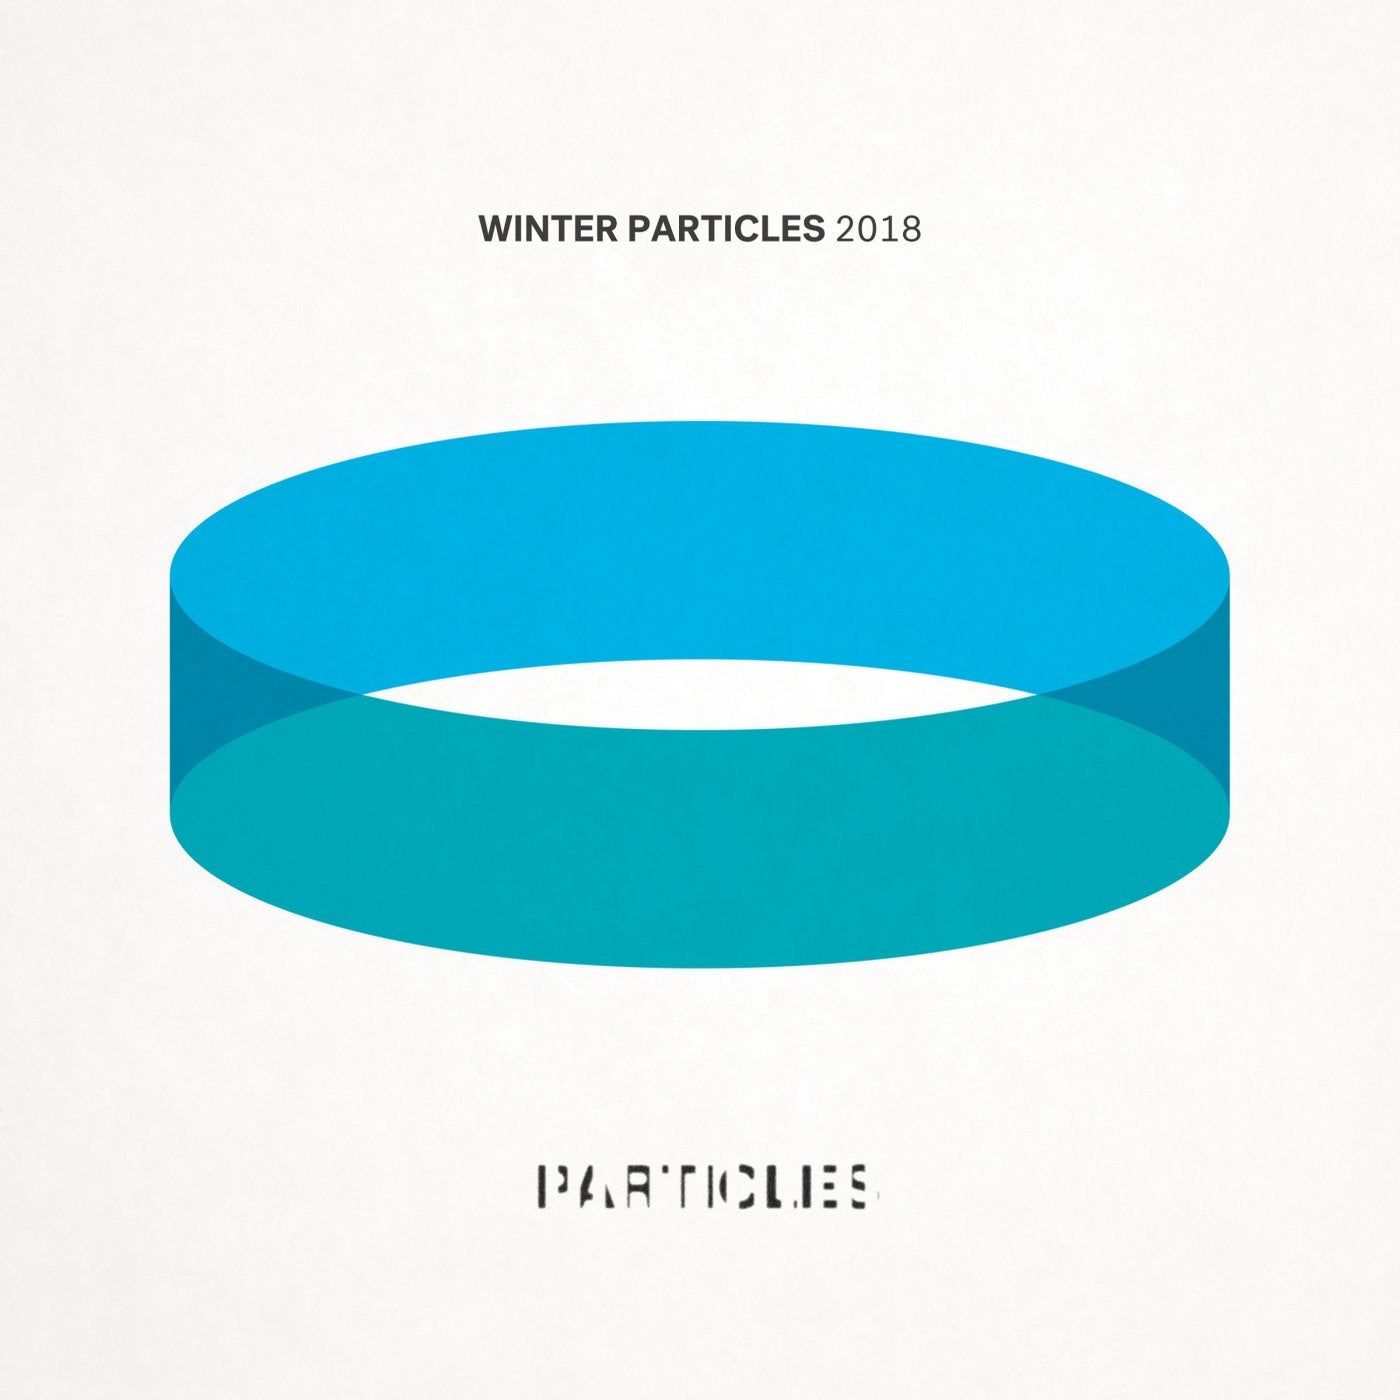 Winter Particles 2018